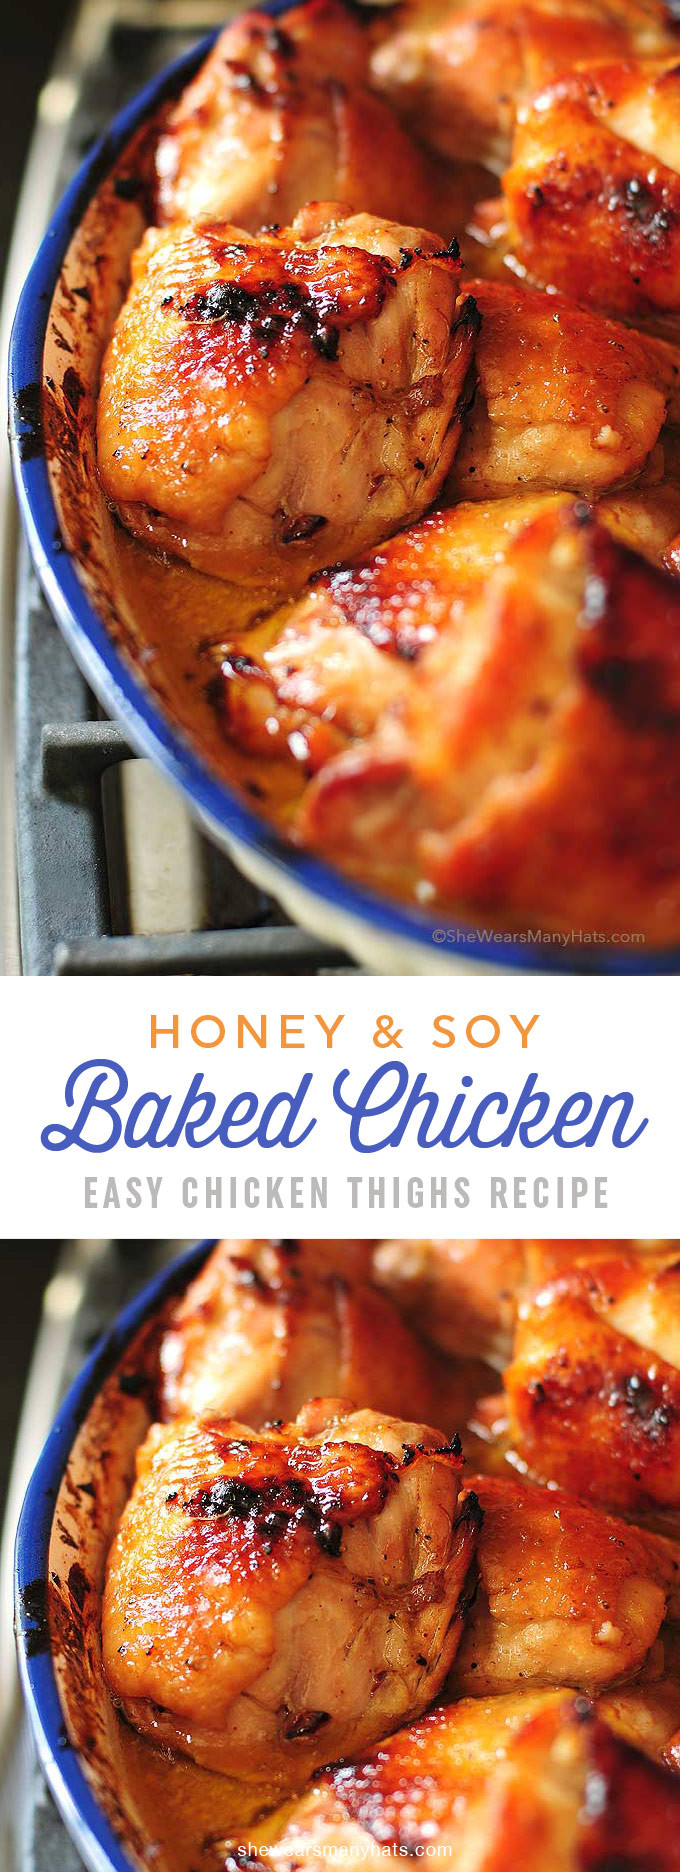 Recipe Baked Chicken Thighs
 Honey Soy Baked Chicken Thighs Recipe